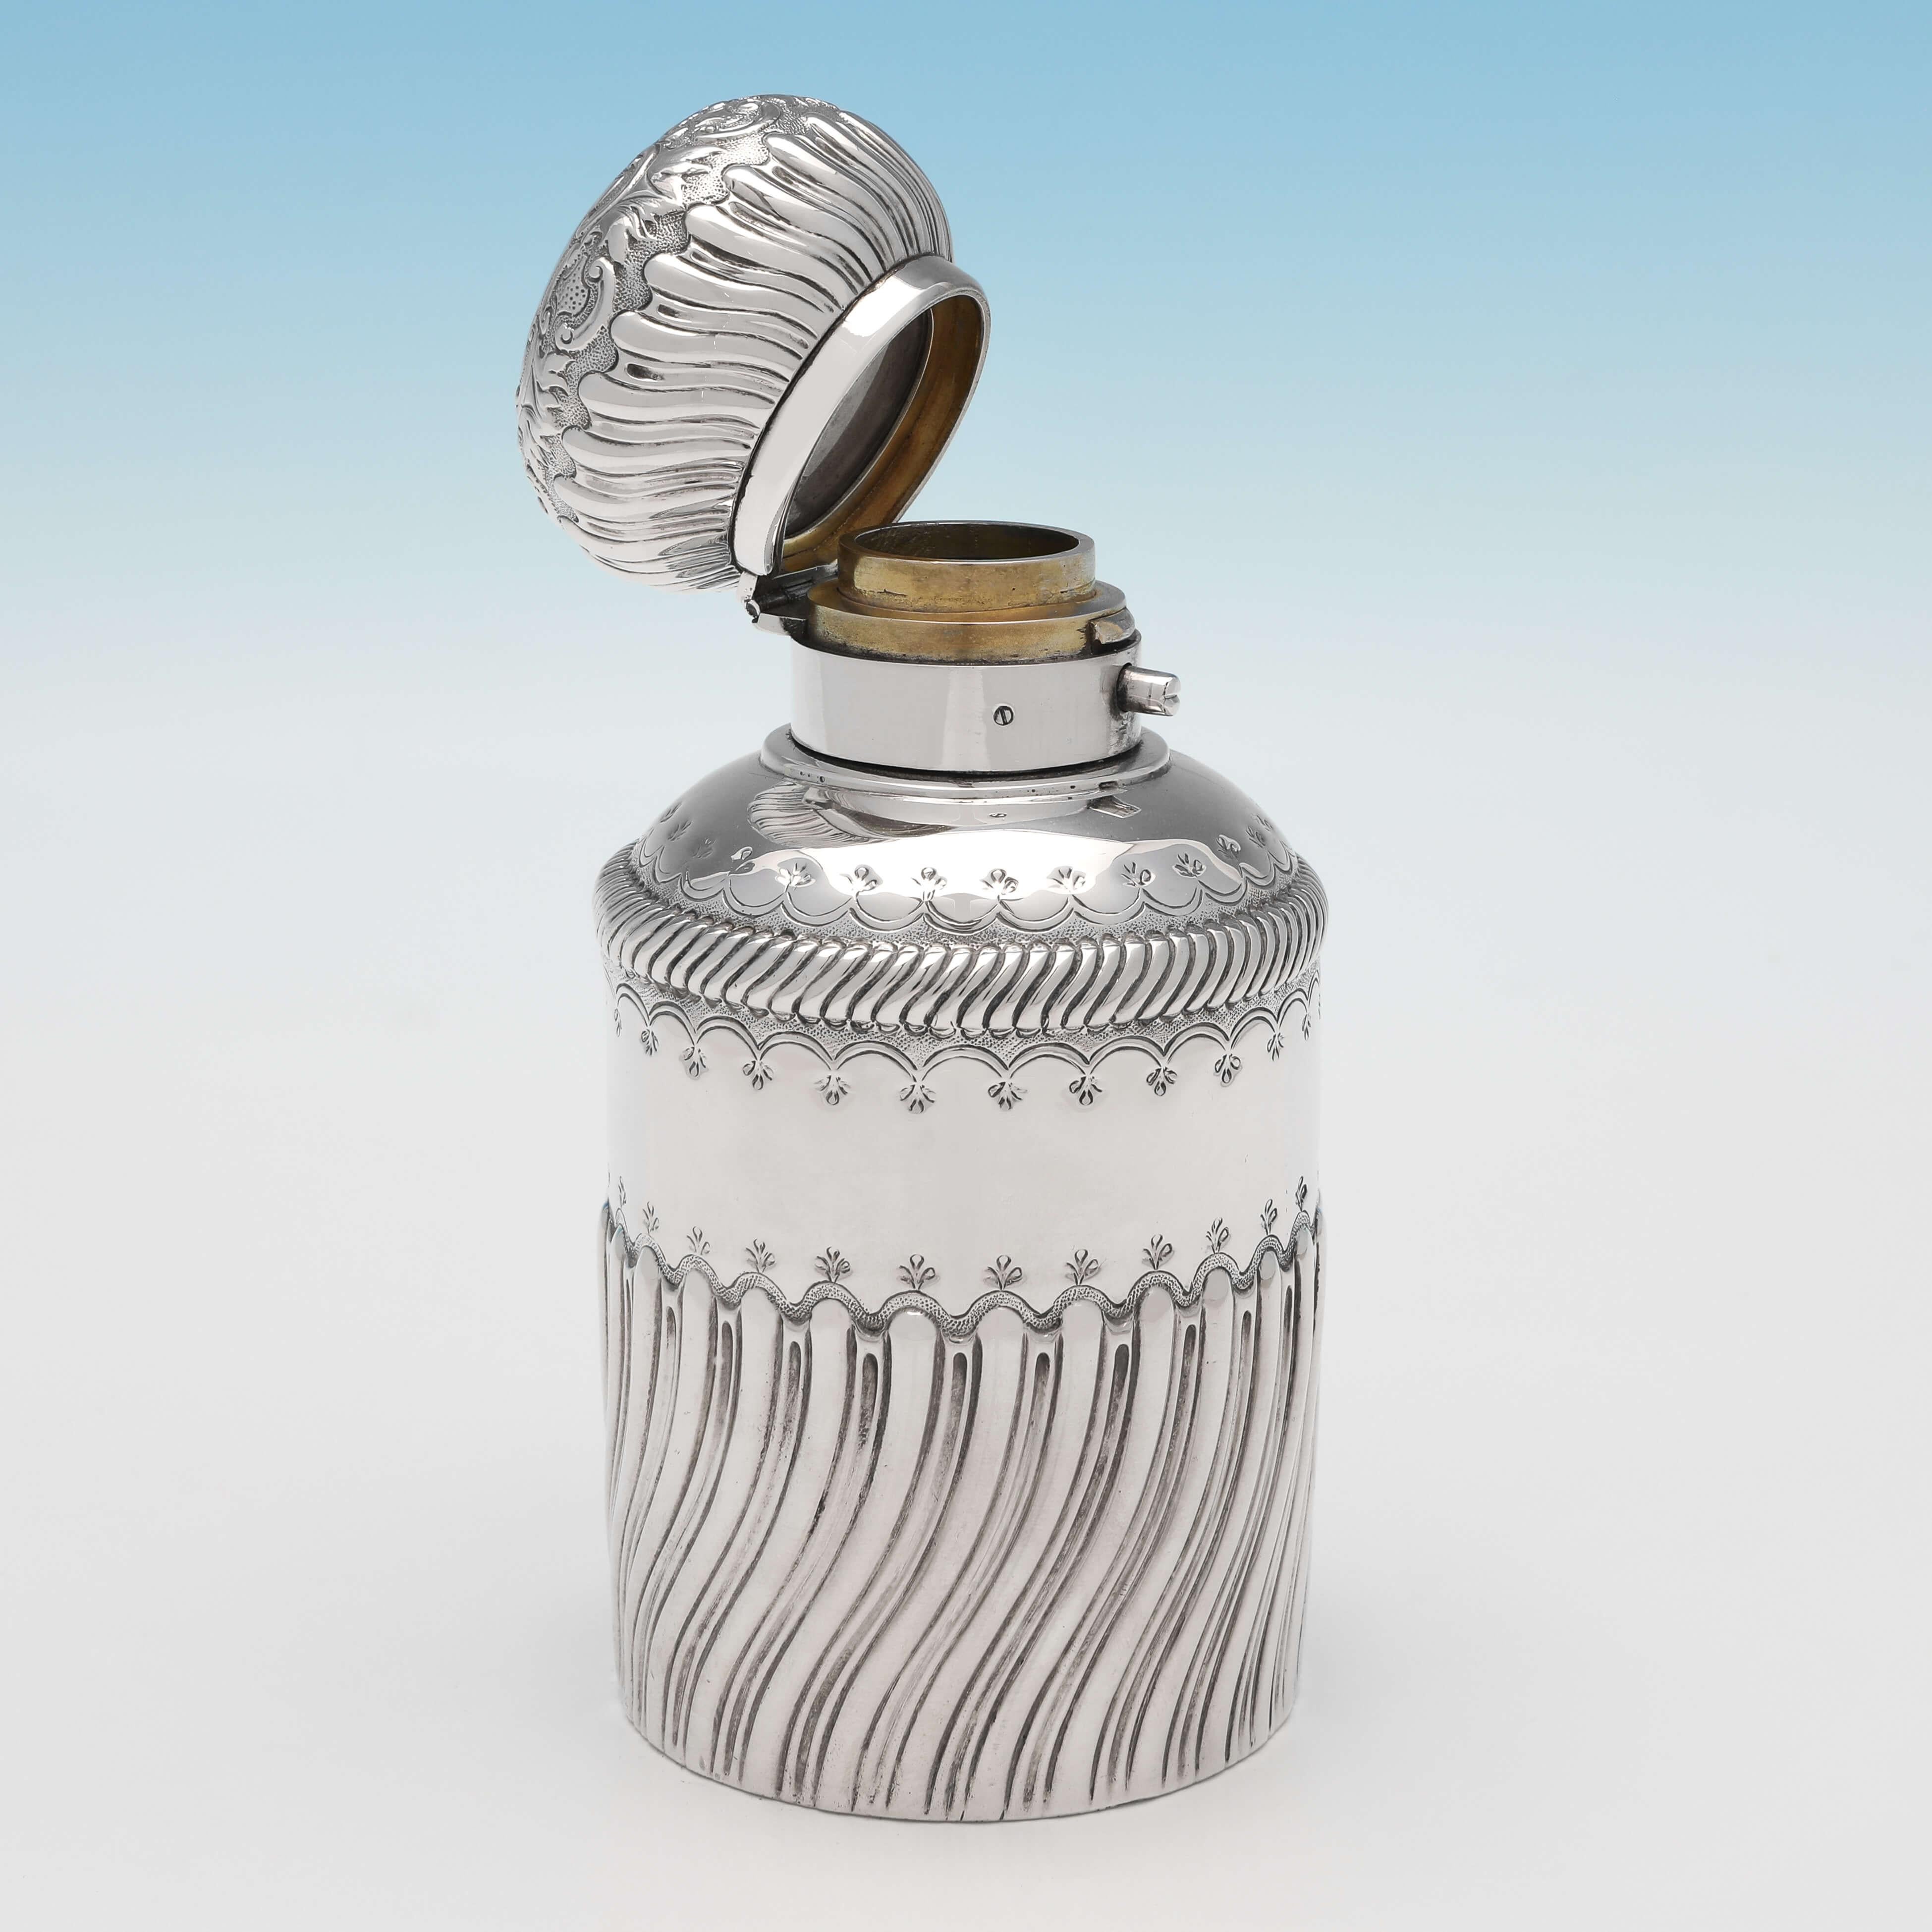 Hallmarked in London in 1885 by George Brace, this unusual, Victorian, Antique Sterling Silver Scent Bottle, features a silver body and lid, both decorated with sunken and swirled fluting, and engraved detailing. The scent bottle measures 5.5